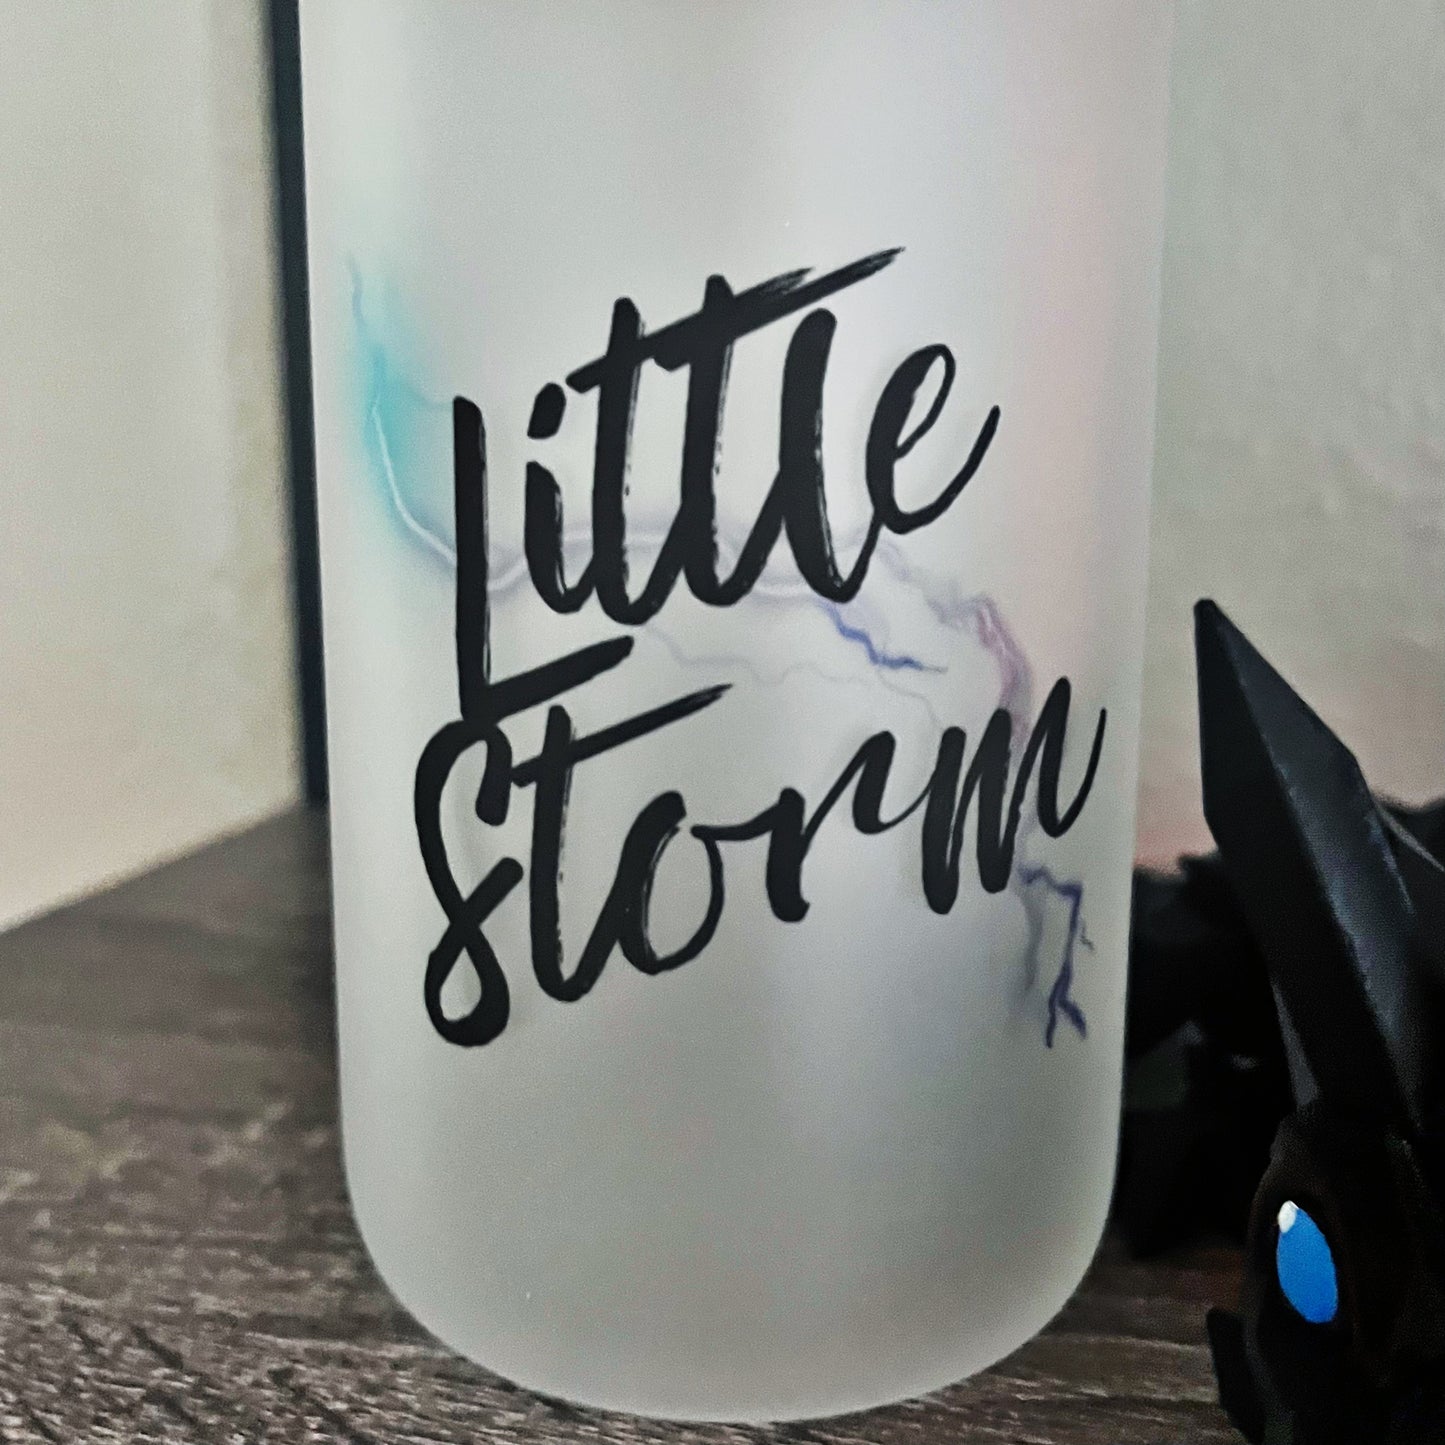 Little Storm Frosted Cup